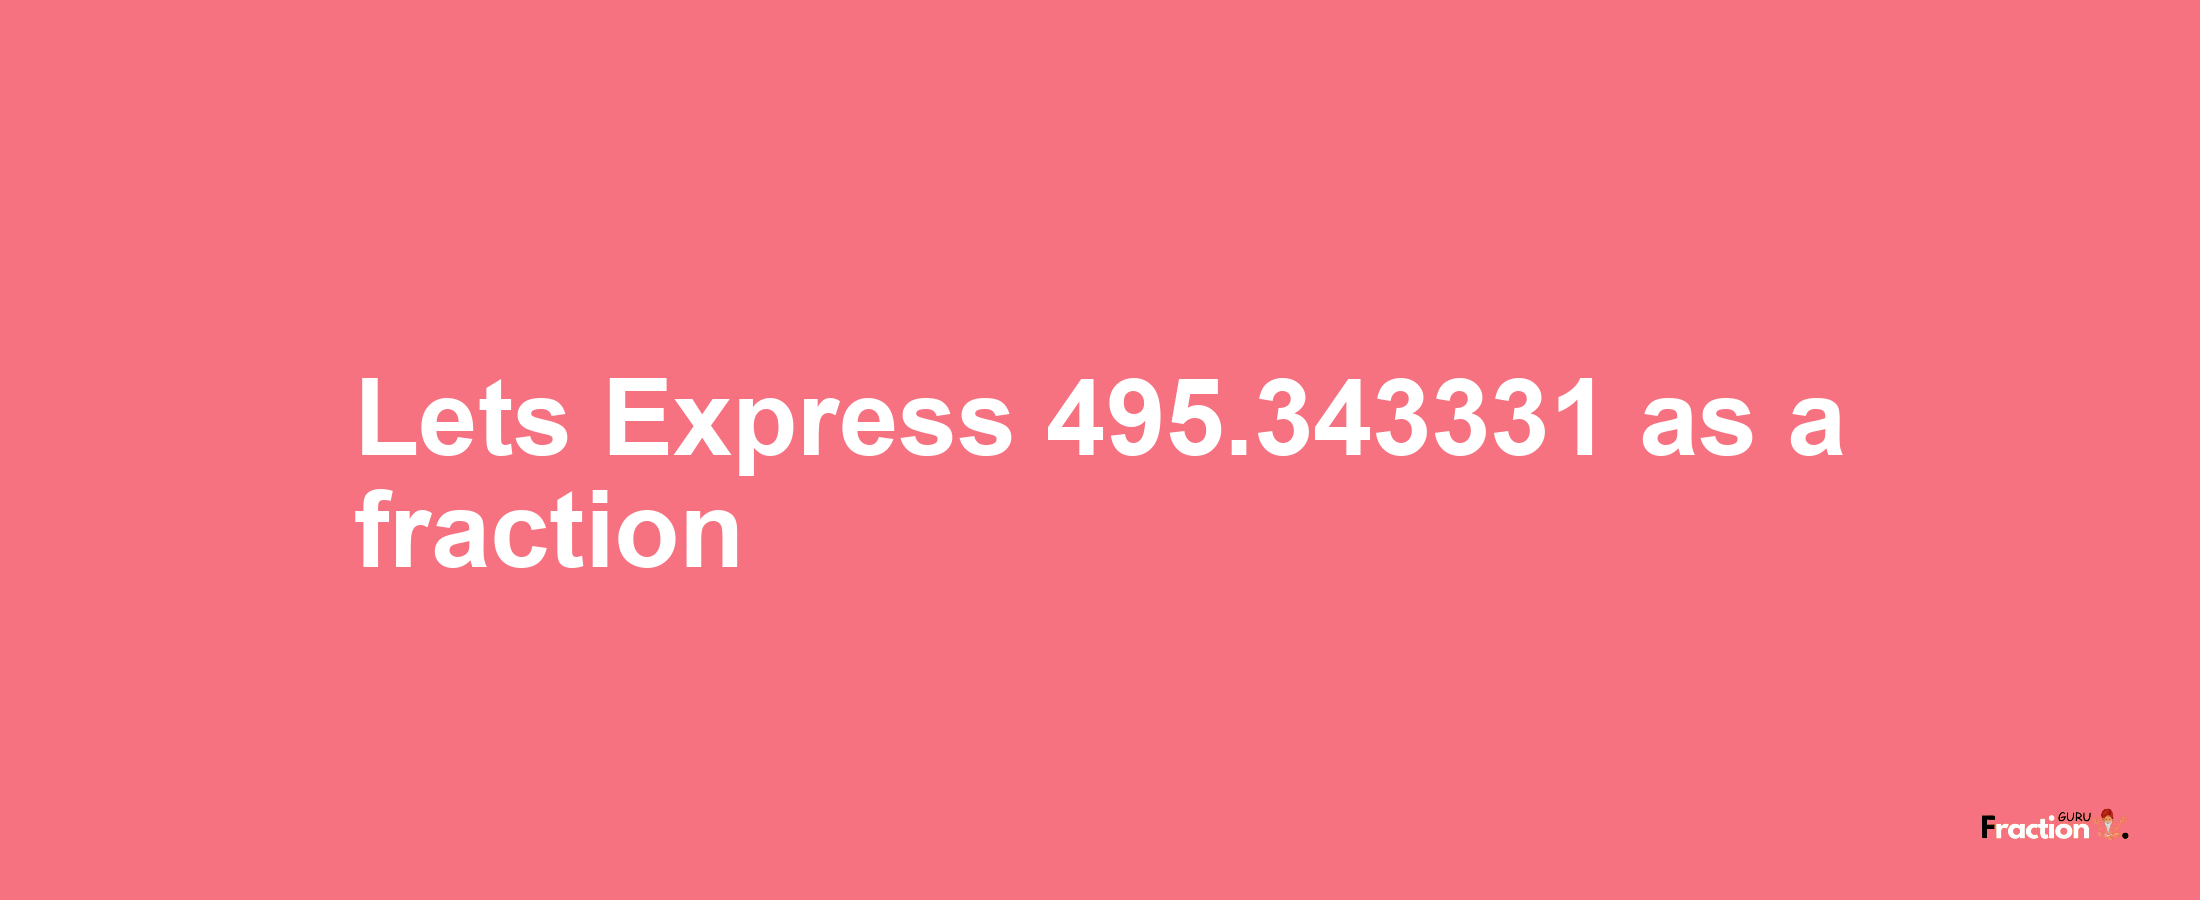 Lets Express 495.343331 as afraction